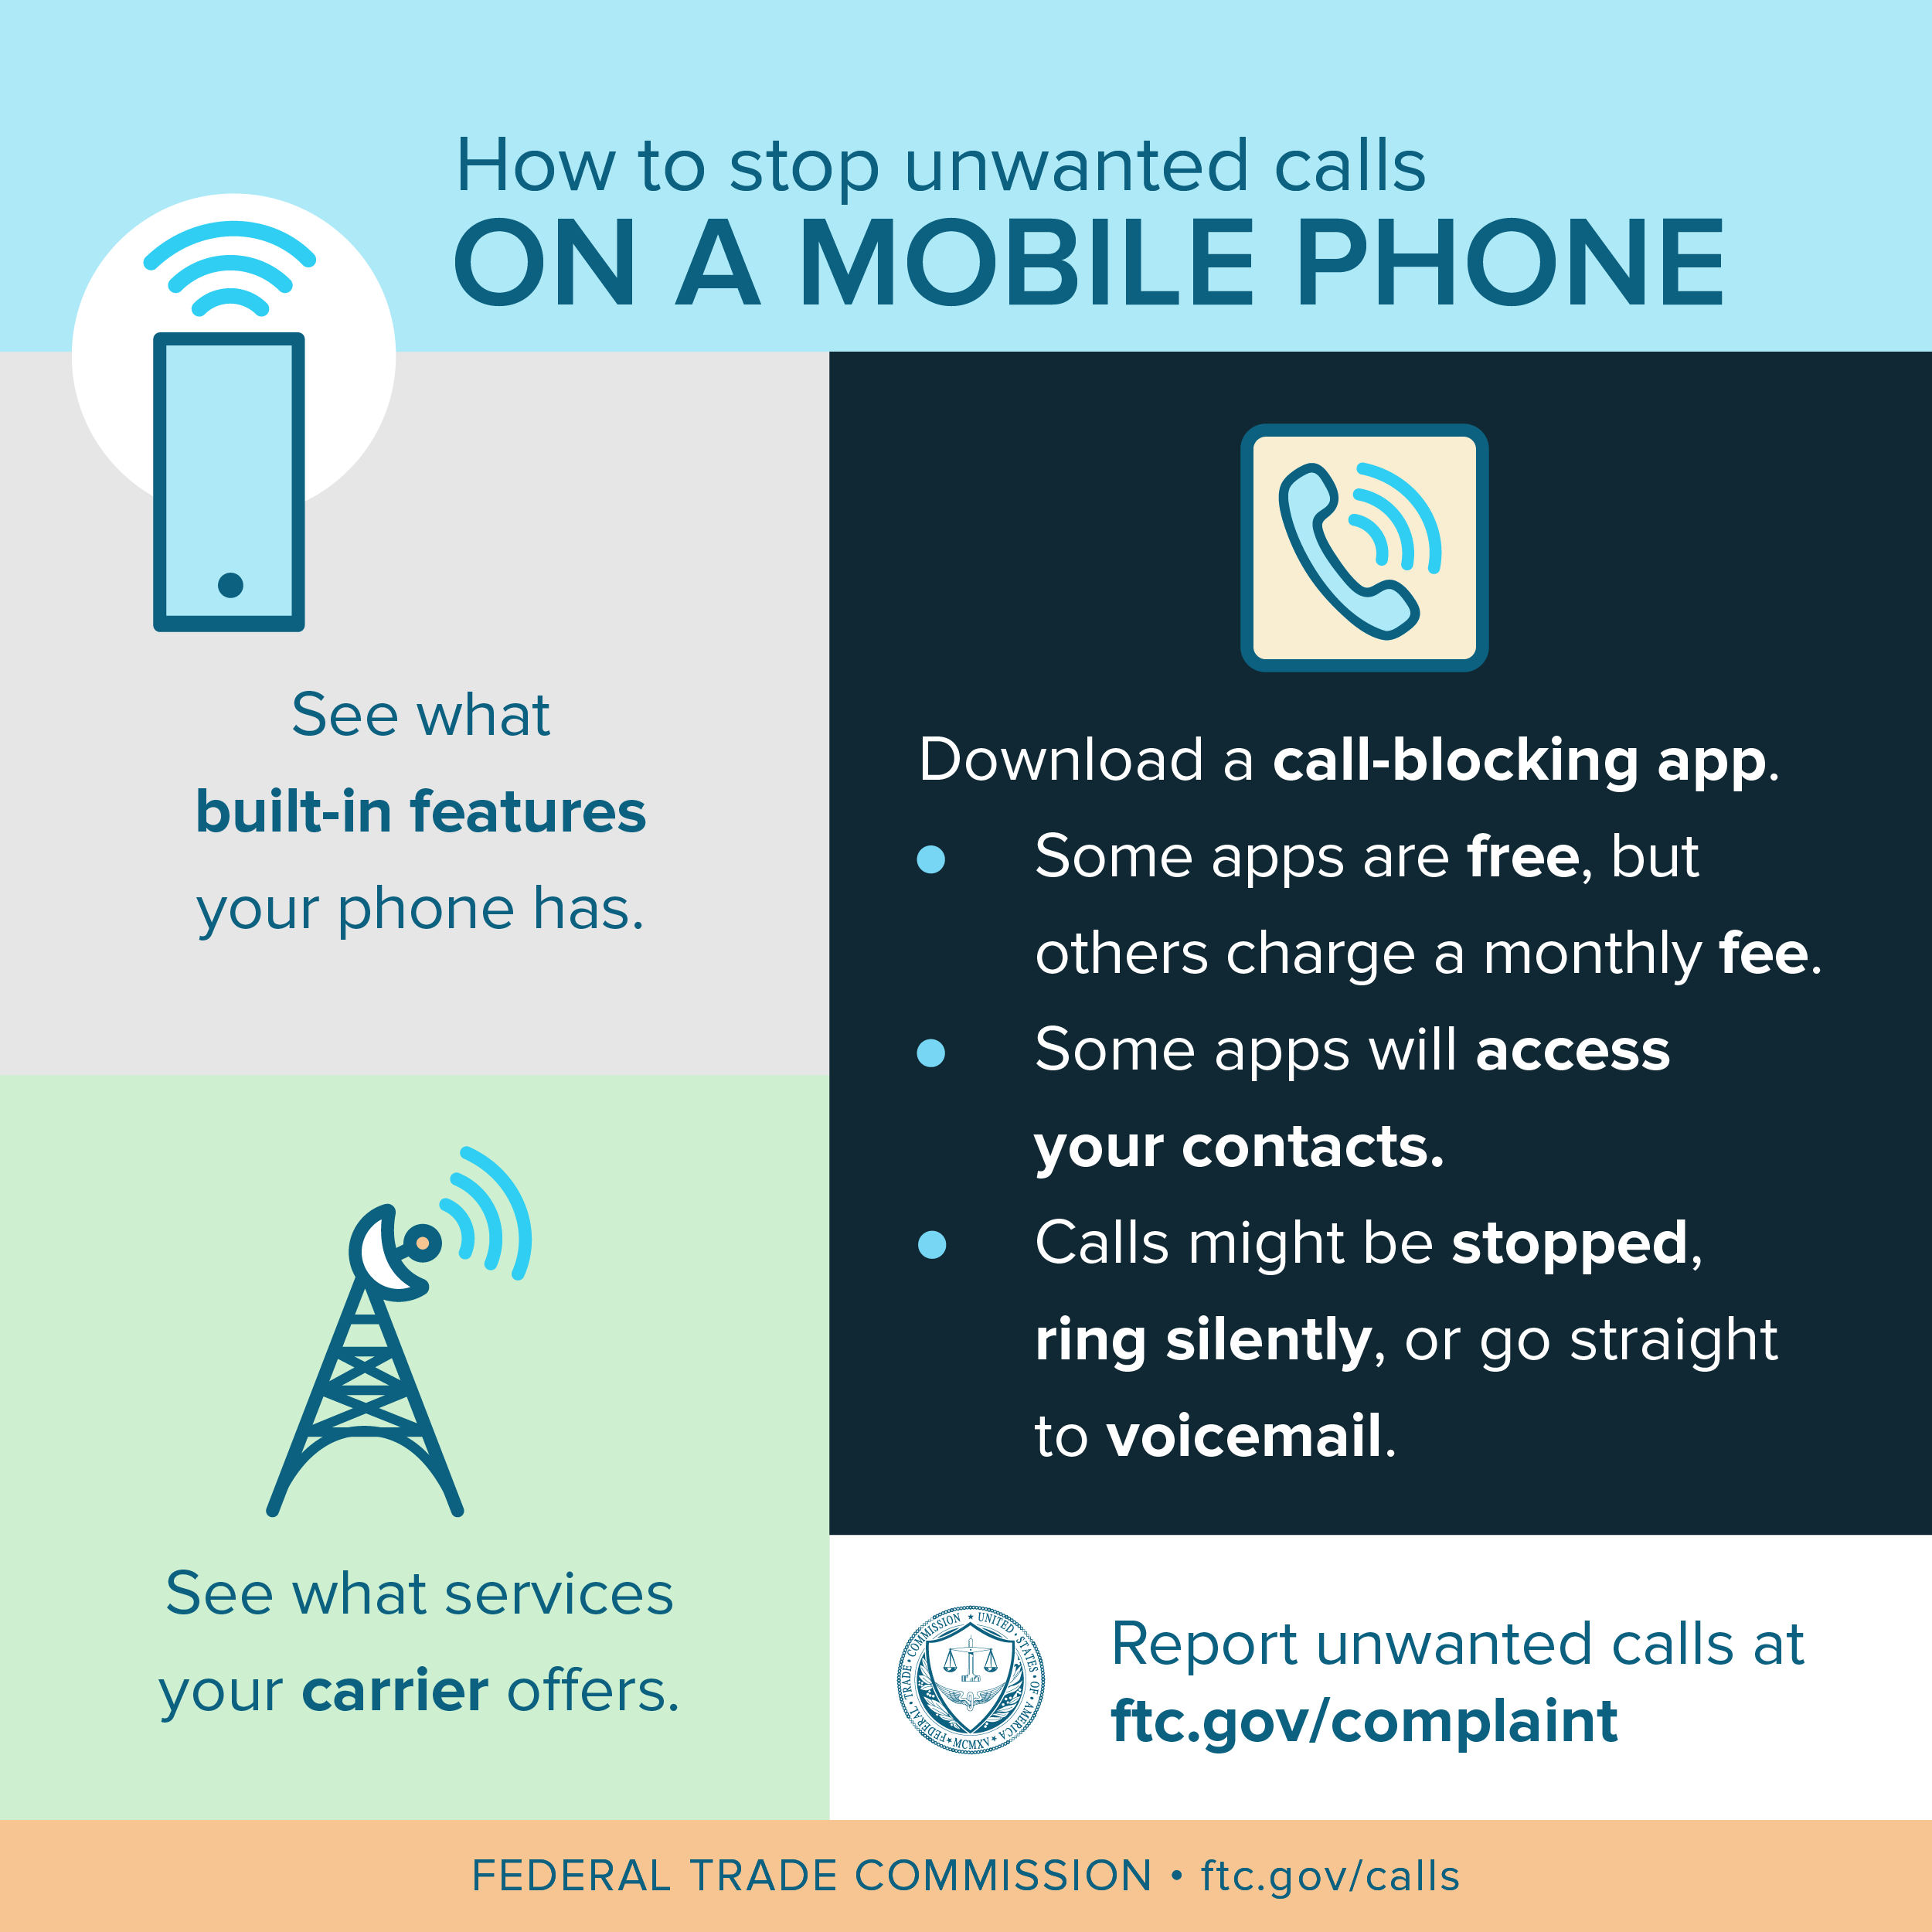 How to Stop Unwanted Calls | FTC Consumer Information